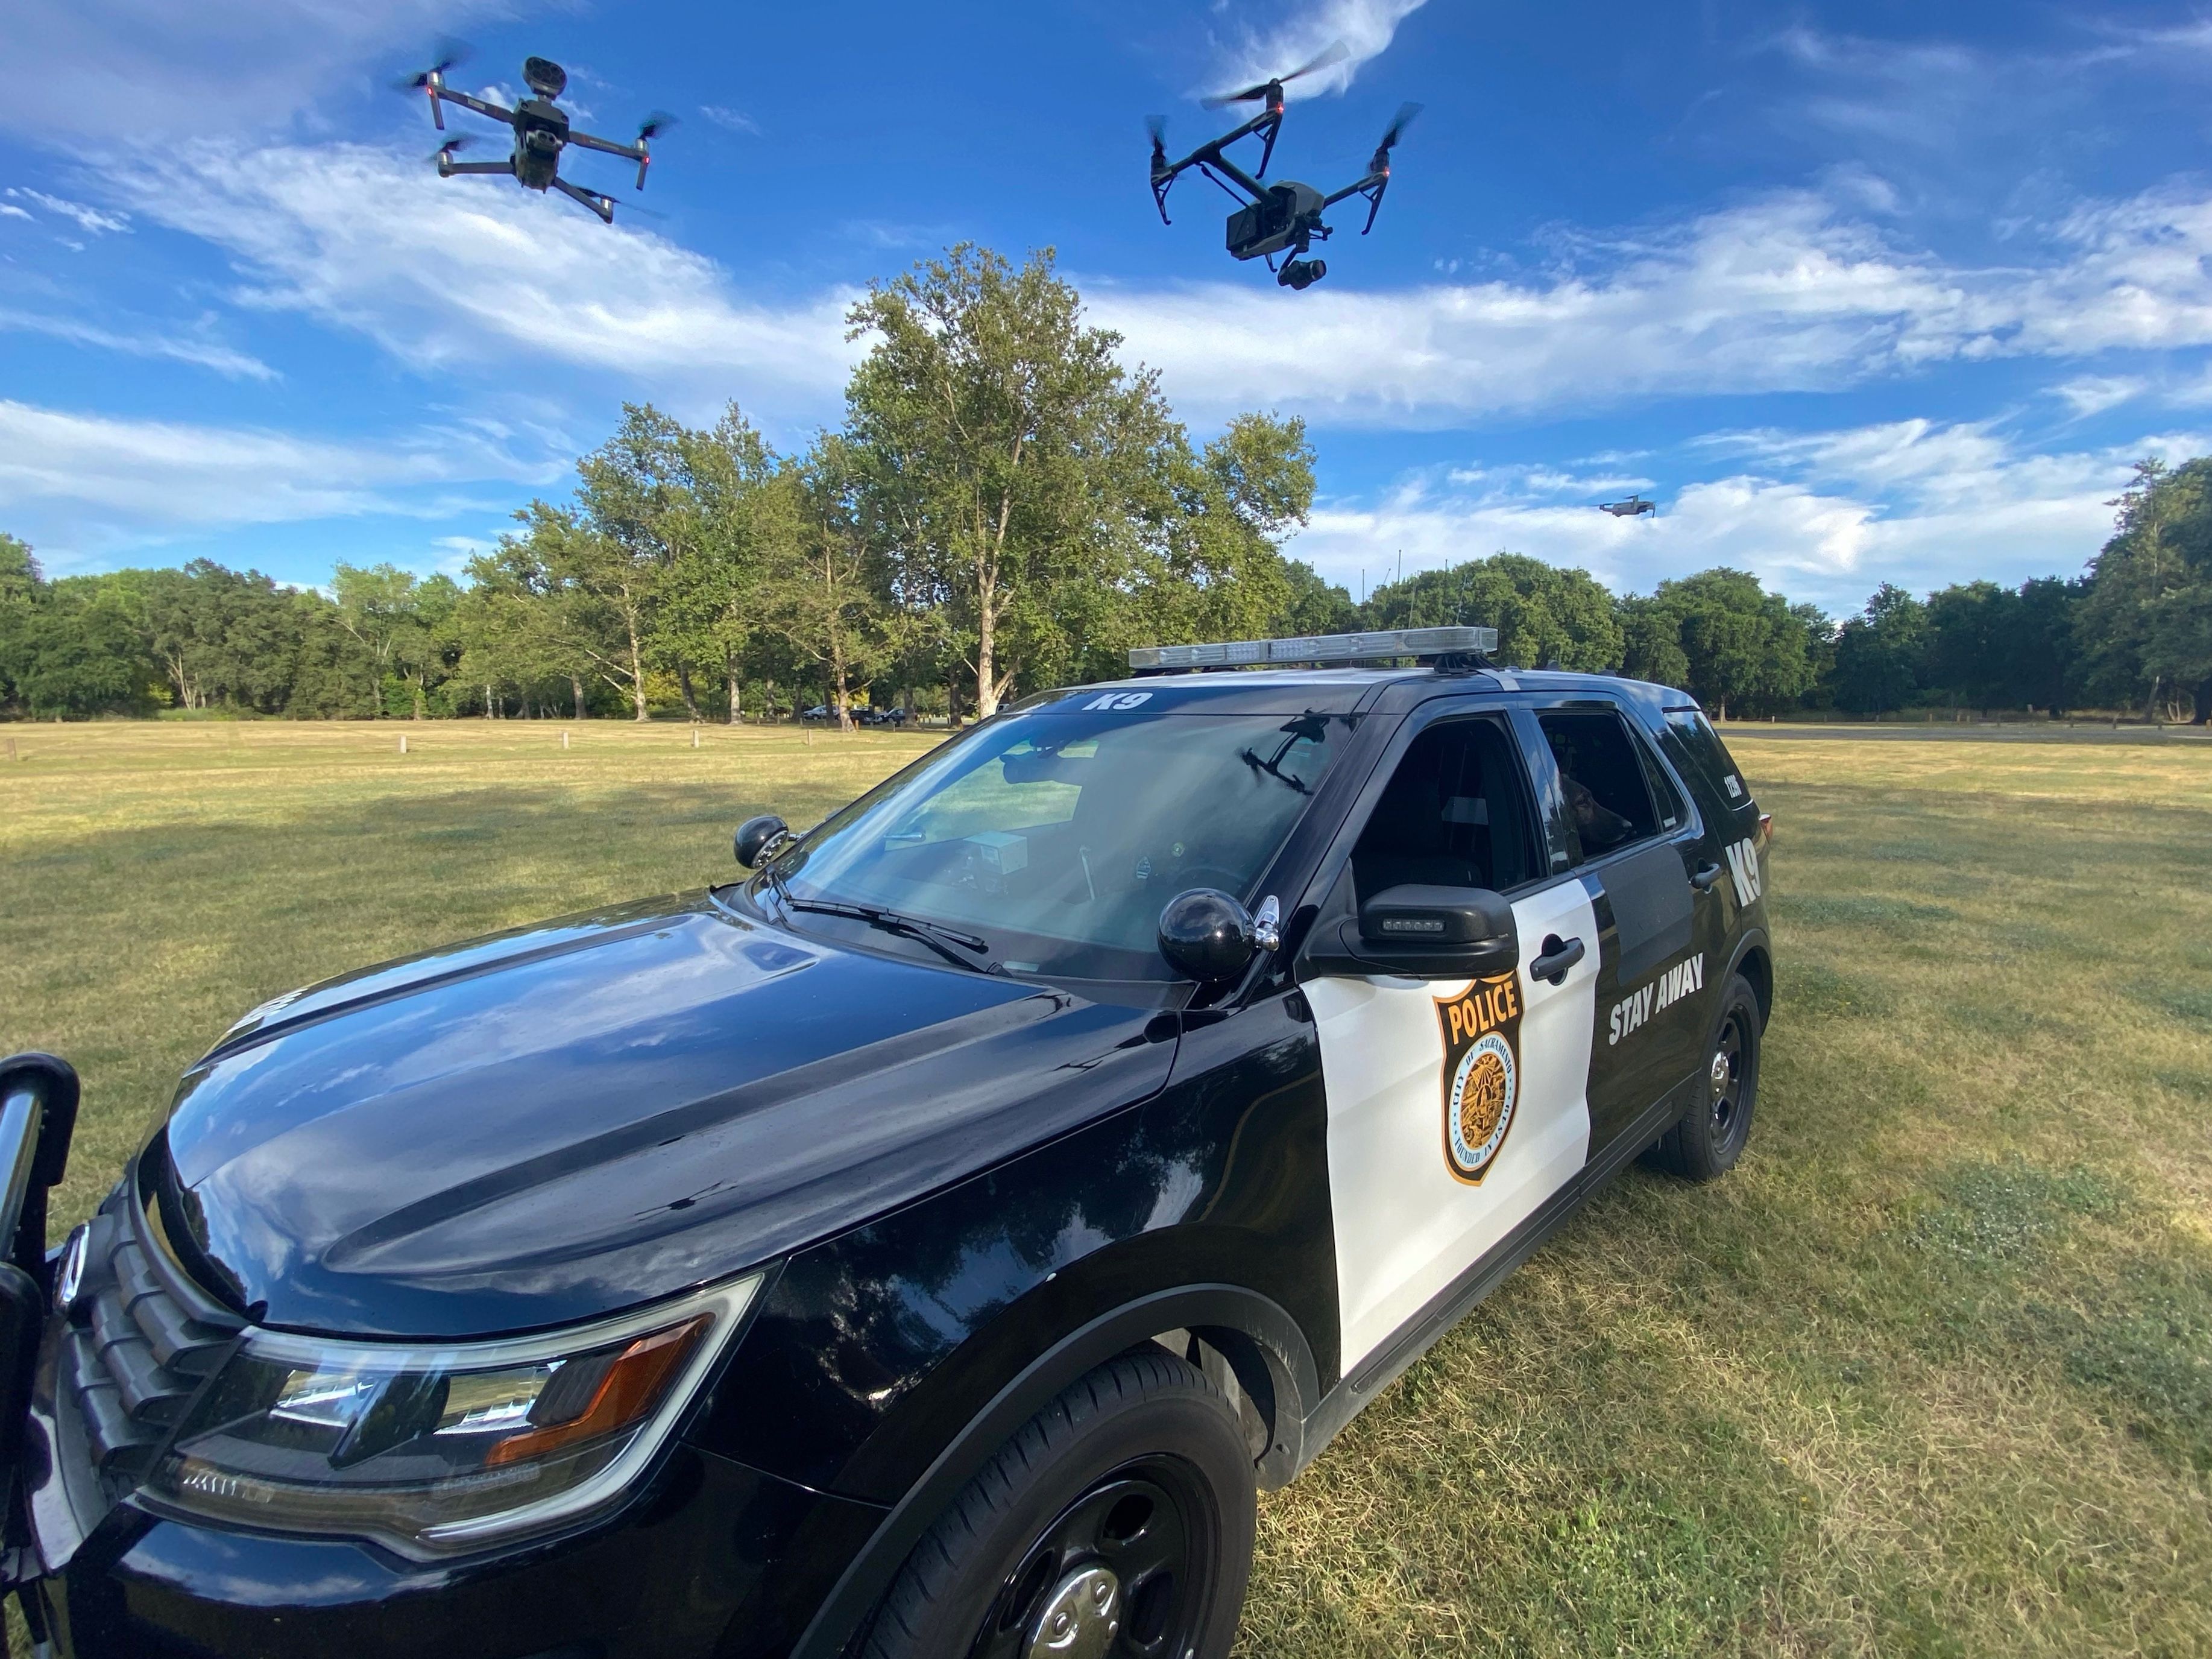 A photo of a fully-marked Sacramento Police Department K9 patrol vehicle parked in a field with two police operated unmanned aircraft systems flying overhead.